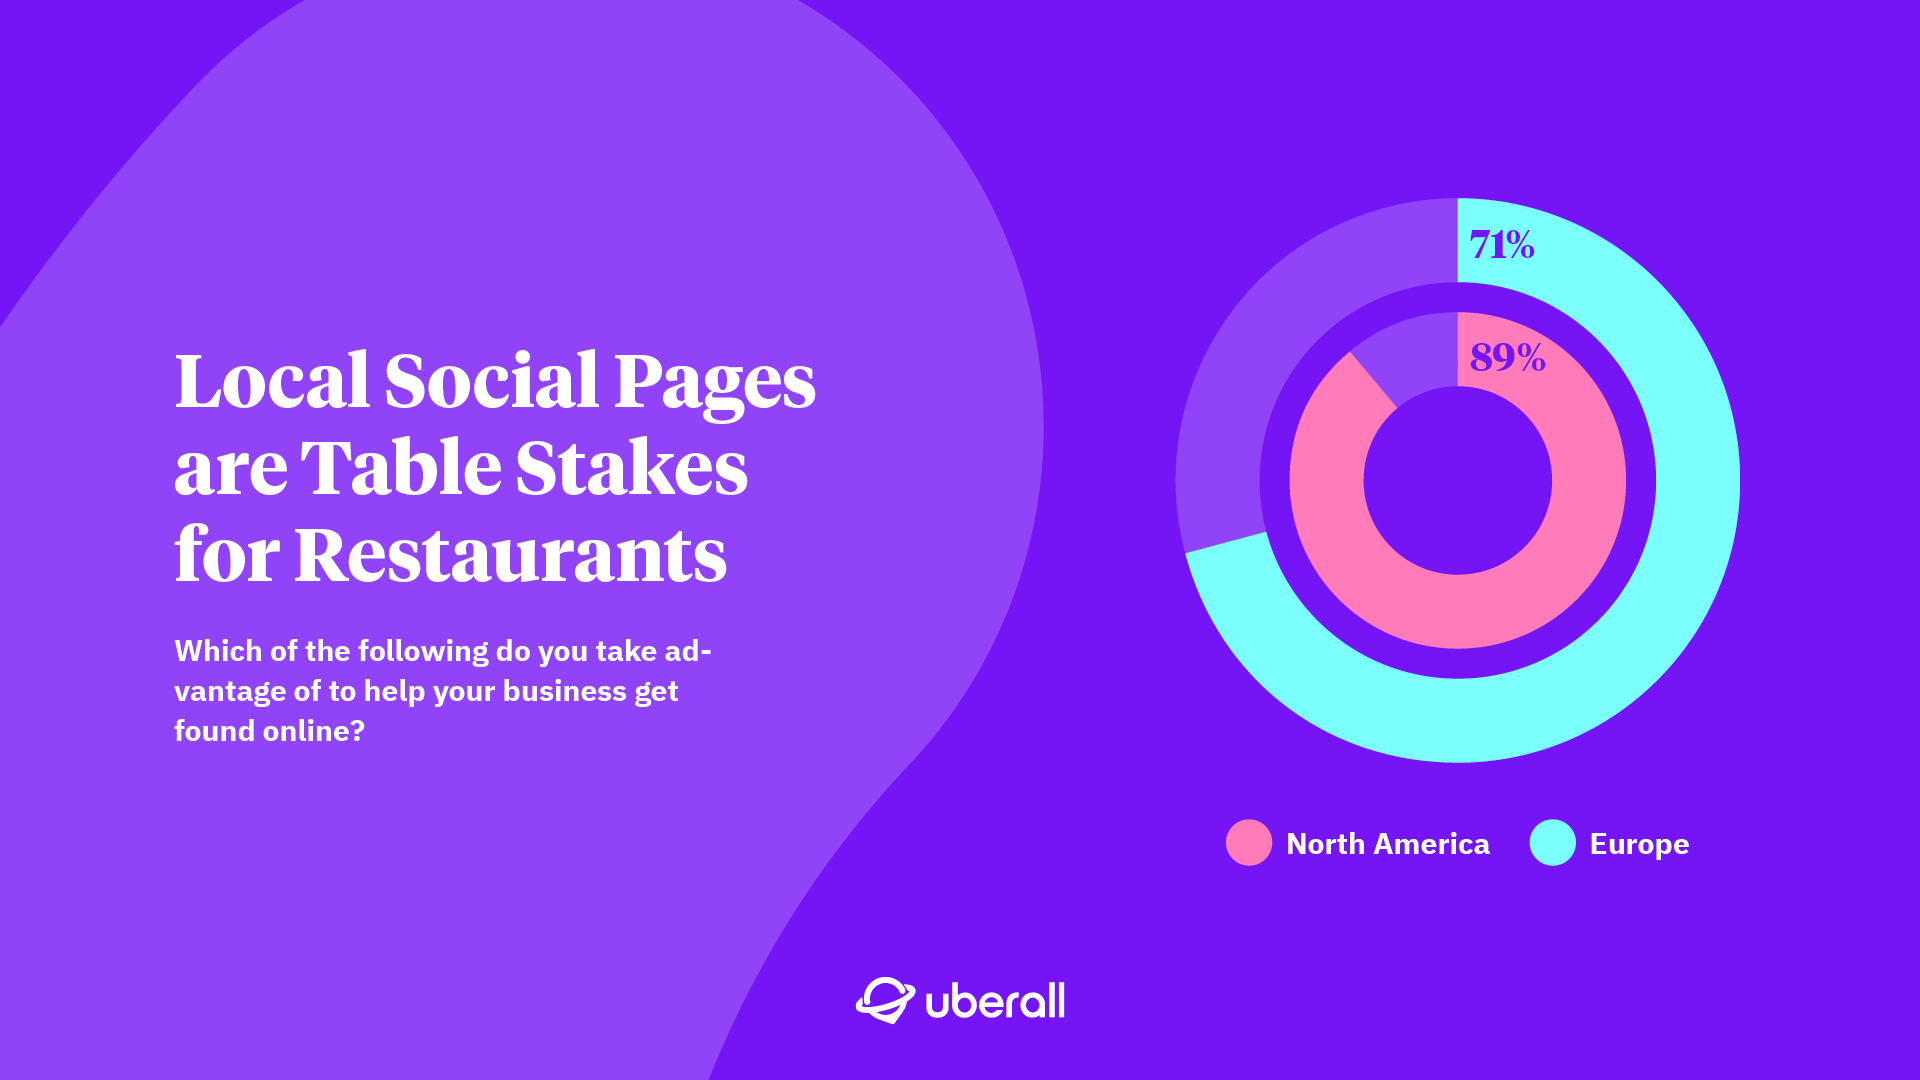 Local Social Pages are Table Stakes for Restaurants